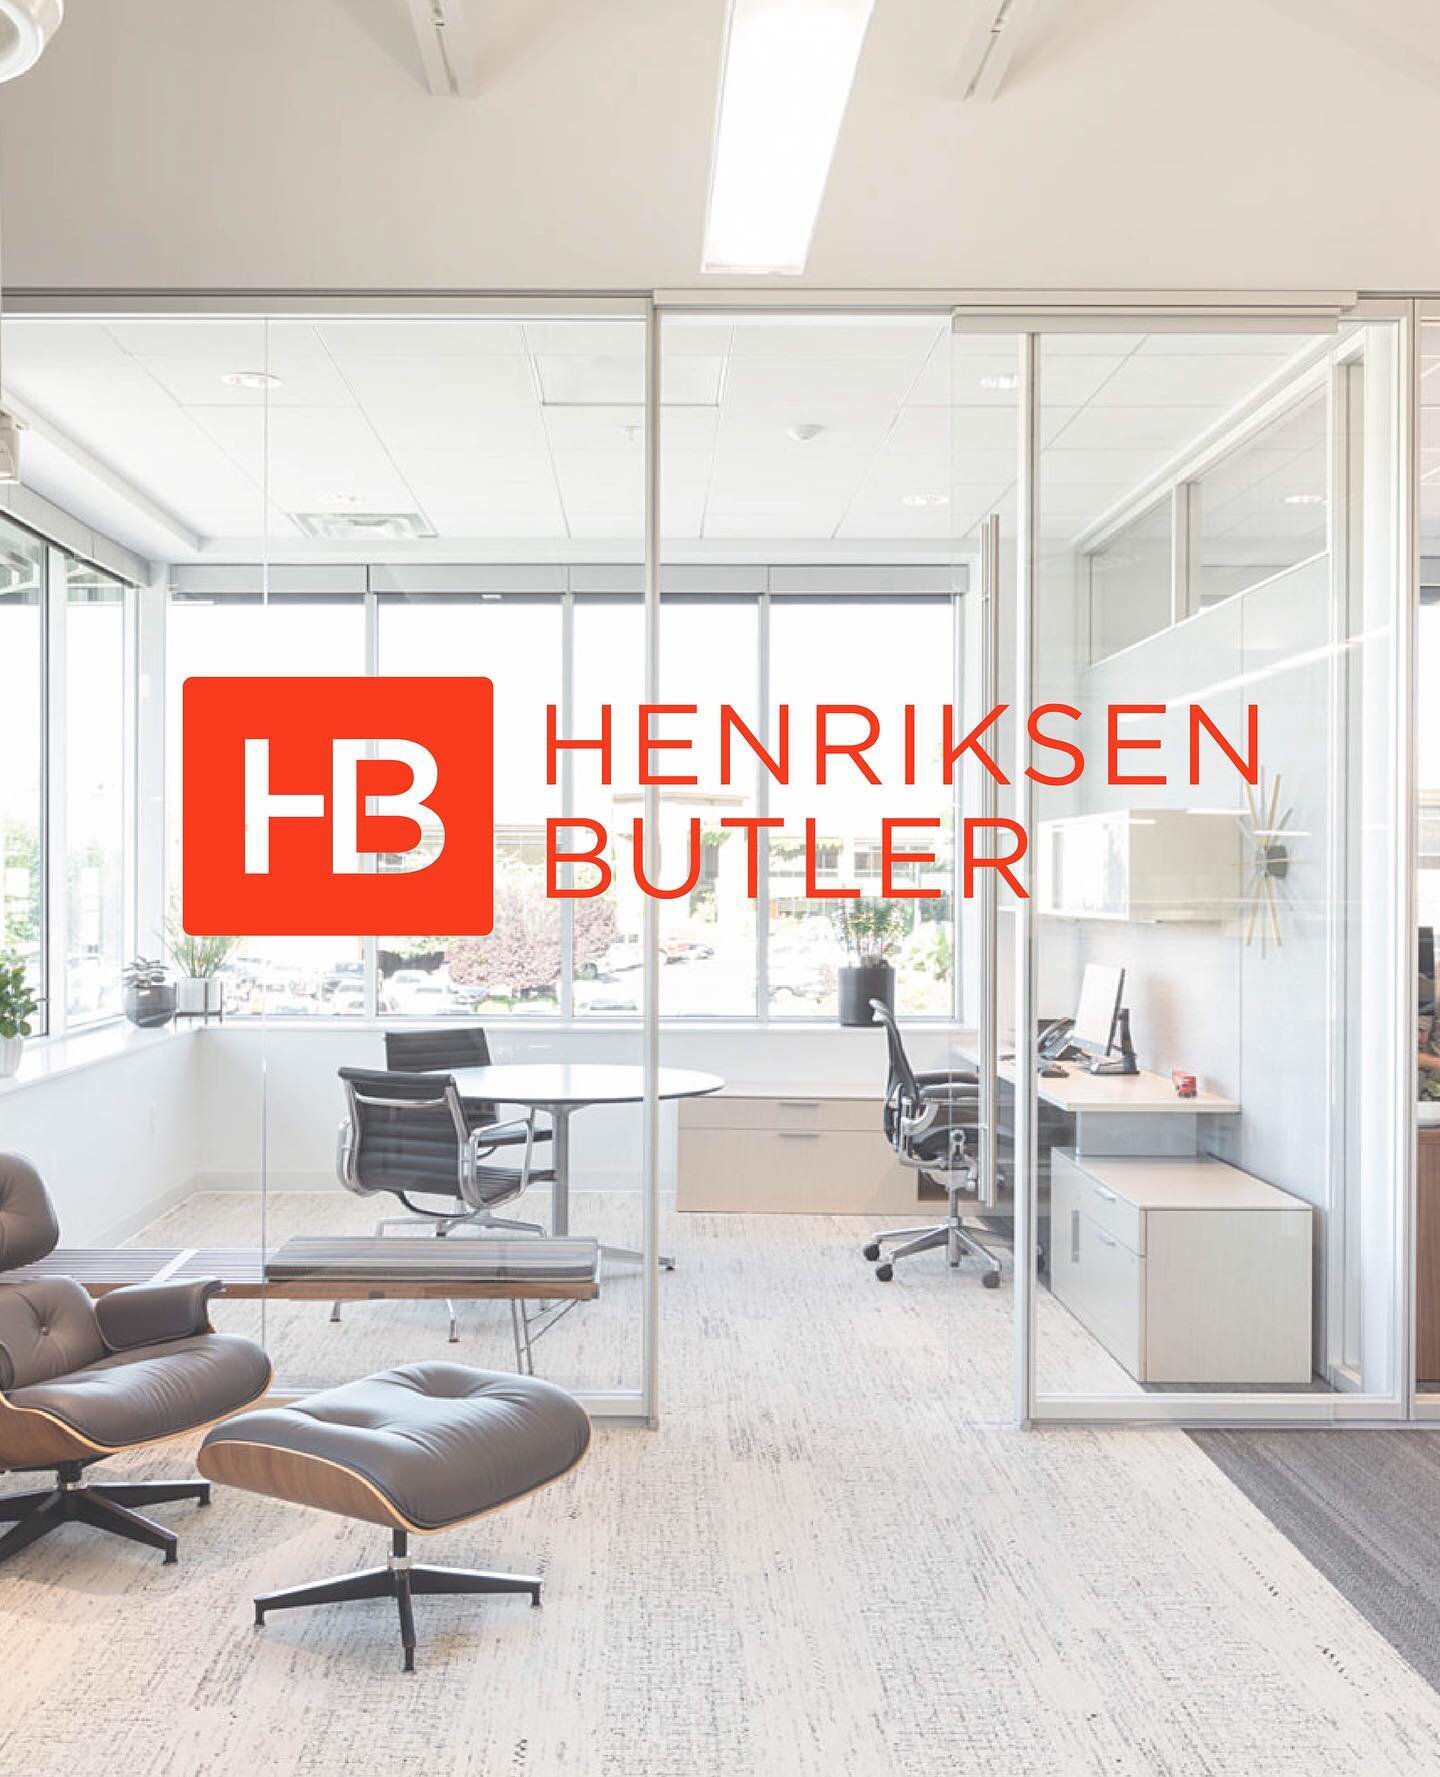 @henriksenbutler is the place to find everything from furniture and accessories to specialty storage, flooring, and prefabricated interior construction.